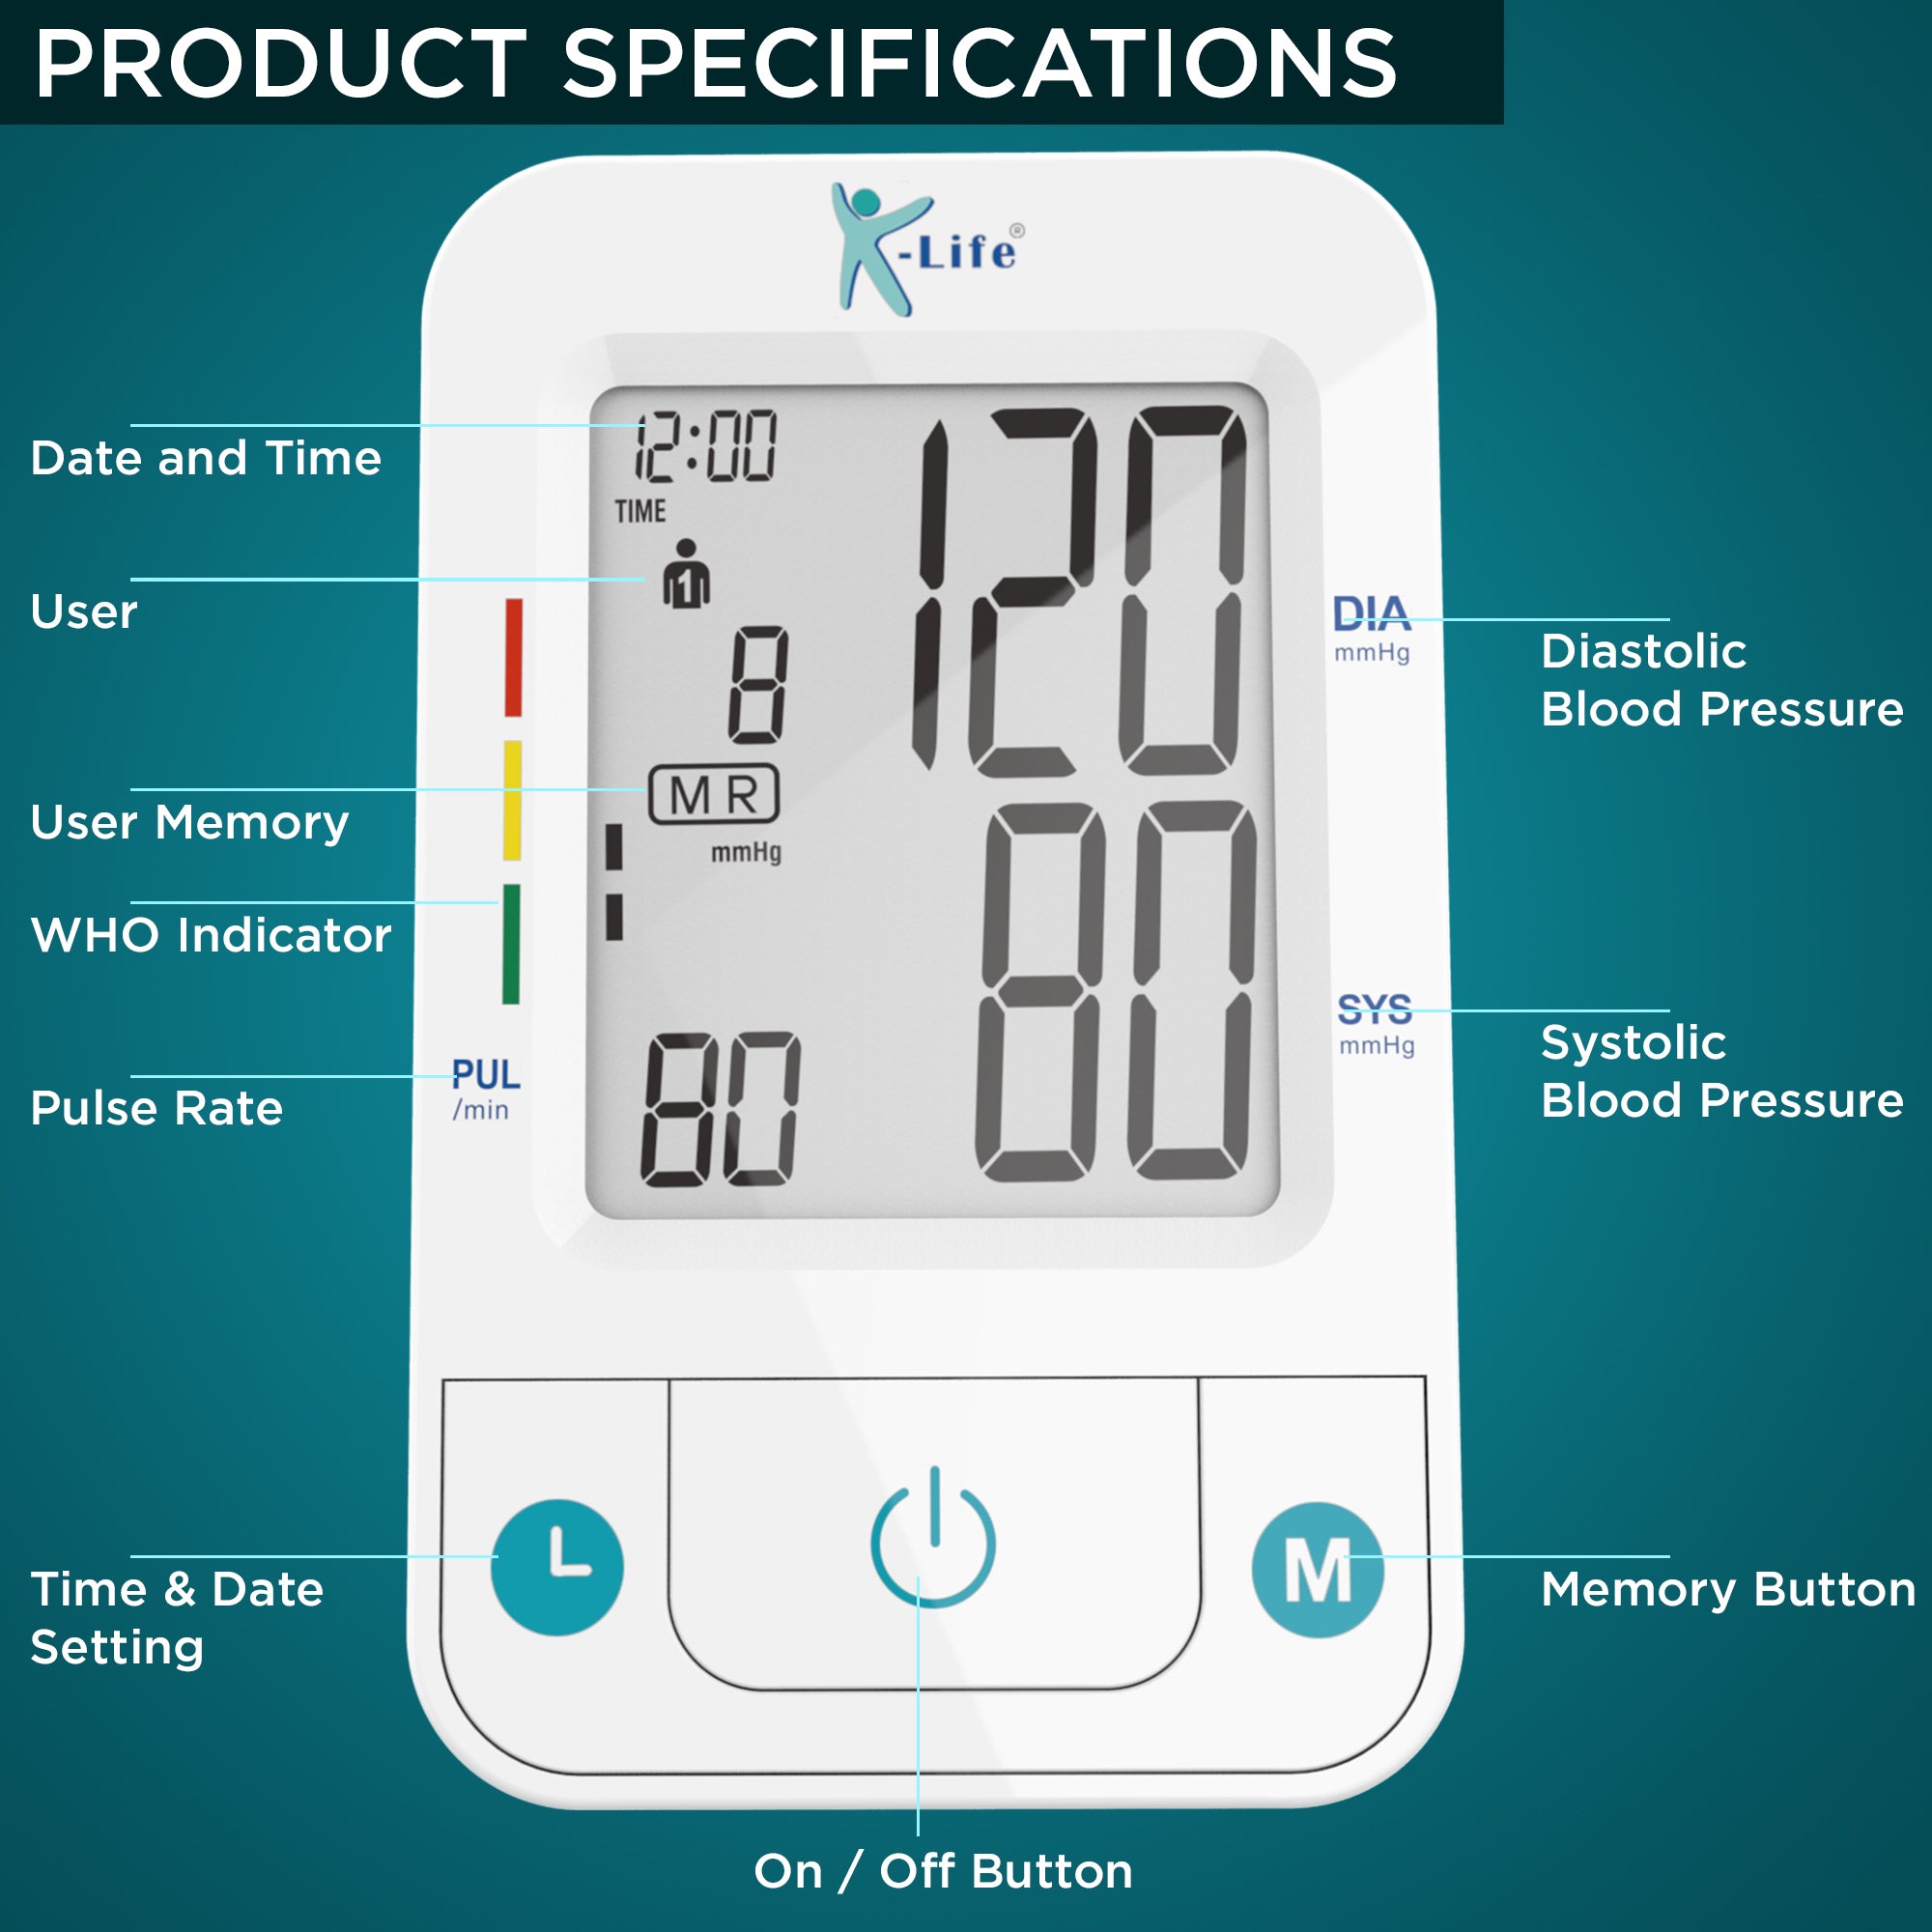 K-Life Model BPM-107 Fully Automatic Digital Electronic Blood Pressure Checking Monitor (white)